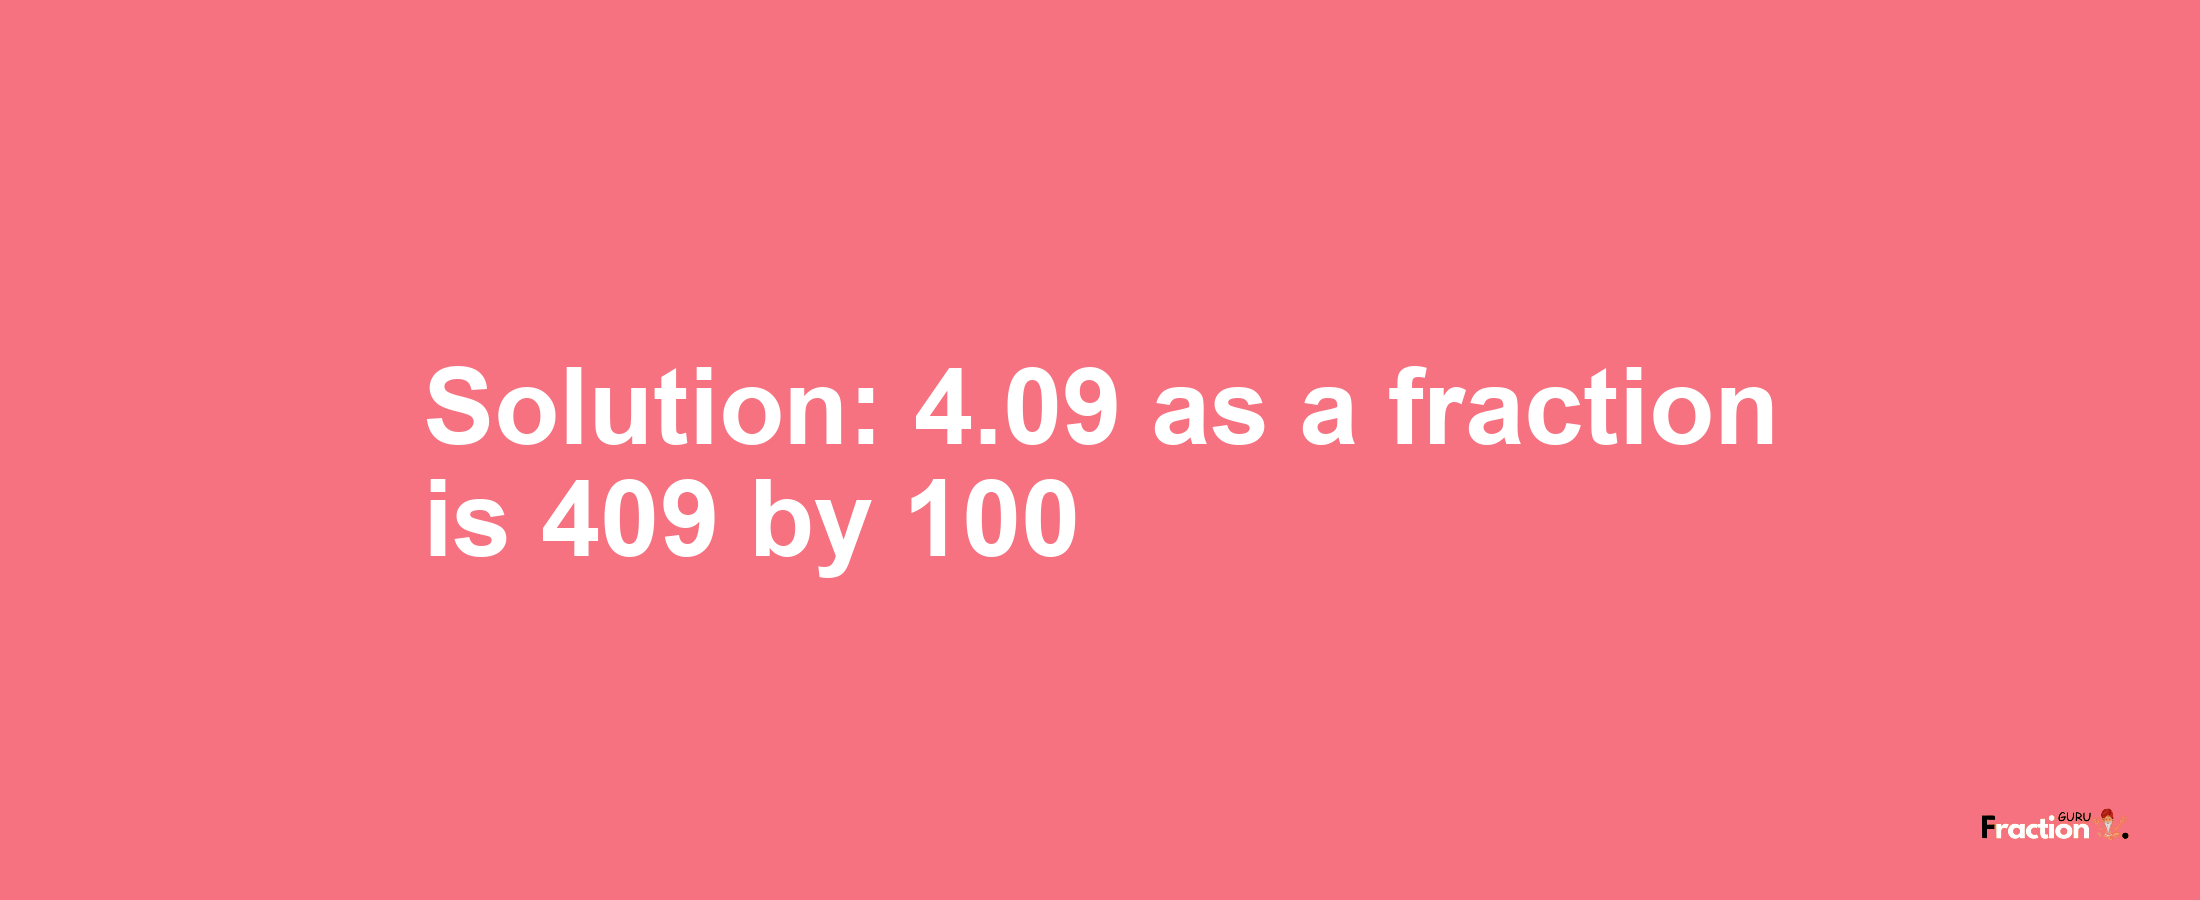 Solution:4.09 as a fraction is 409/100